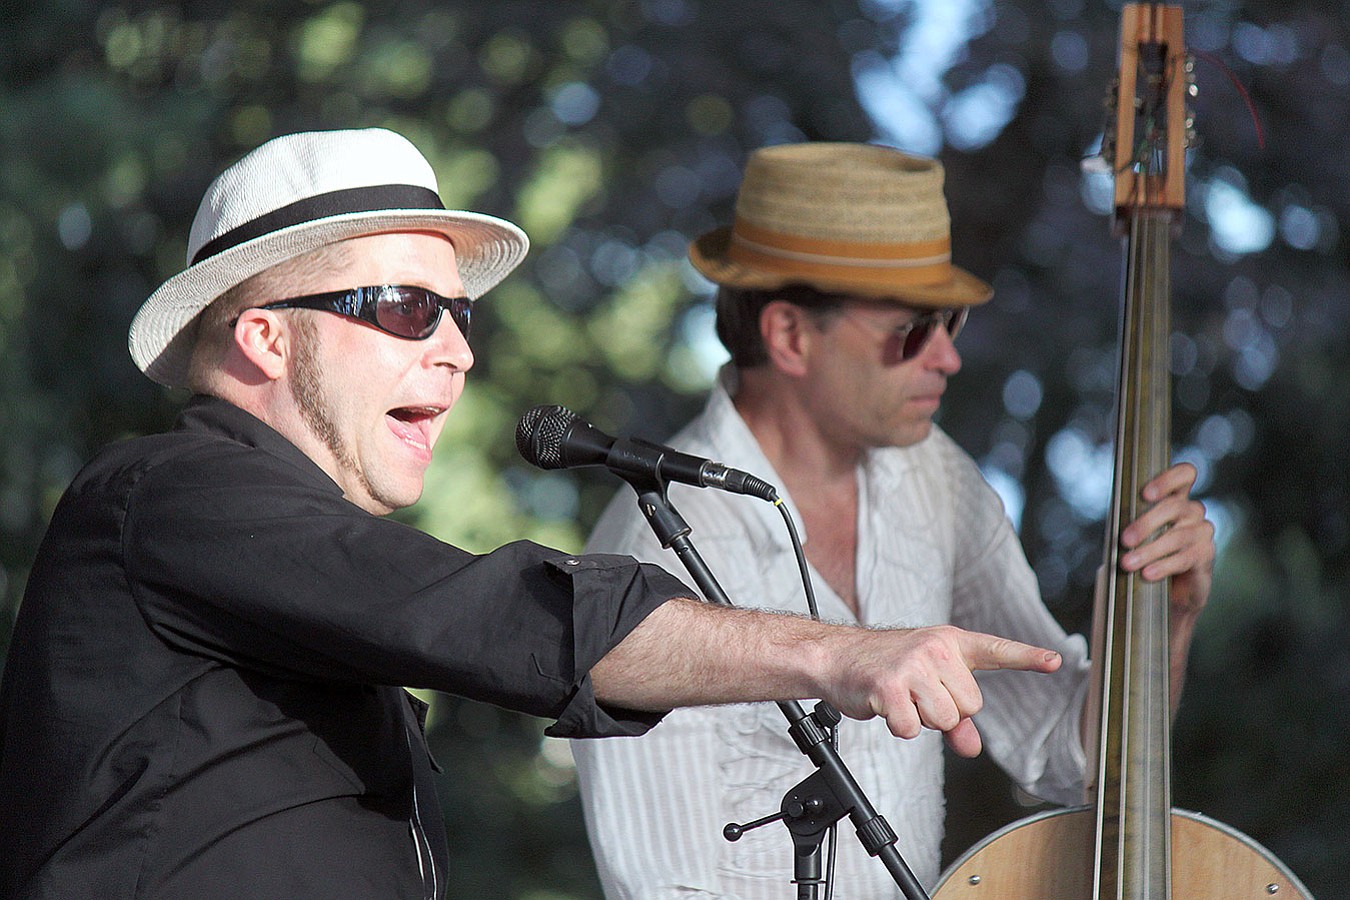 Trashcan Joe, a jazz band that uses instruments made from recycled and found objects, opened the Camas Days festival Wednesday as part of the Concerts in the Park series, organized by Camas Parks and Recreation.